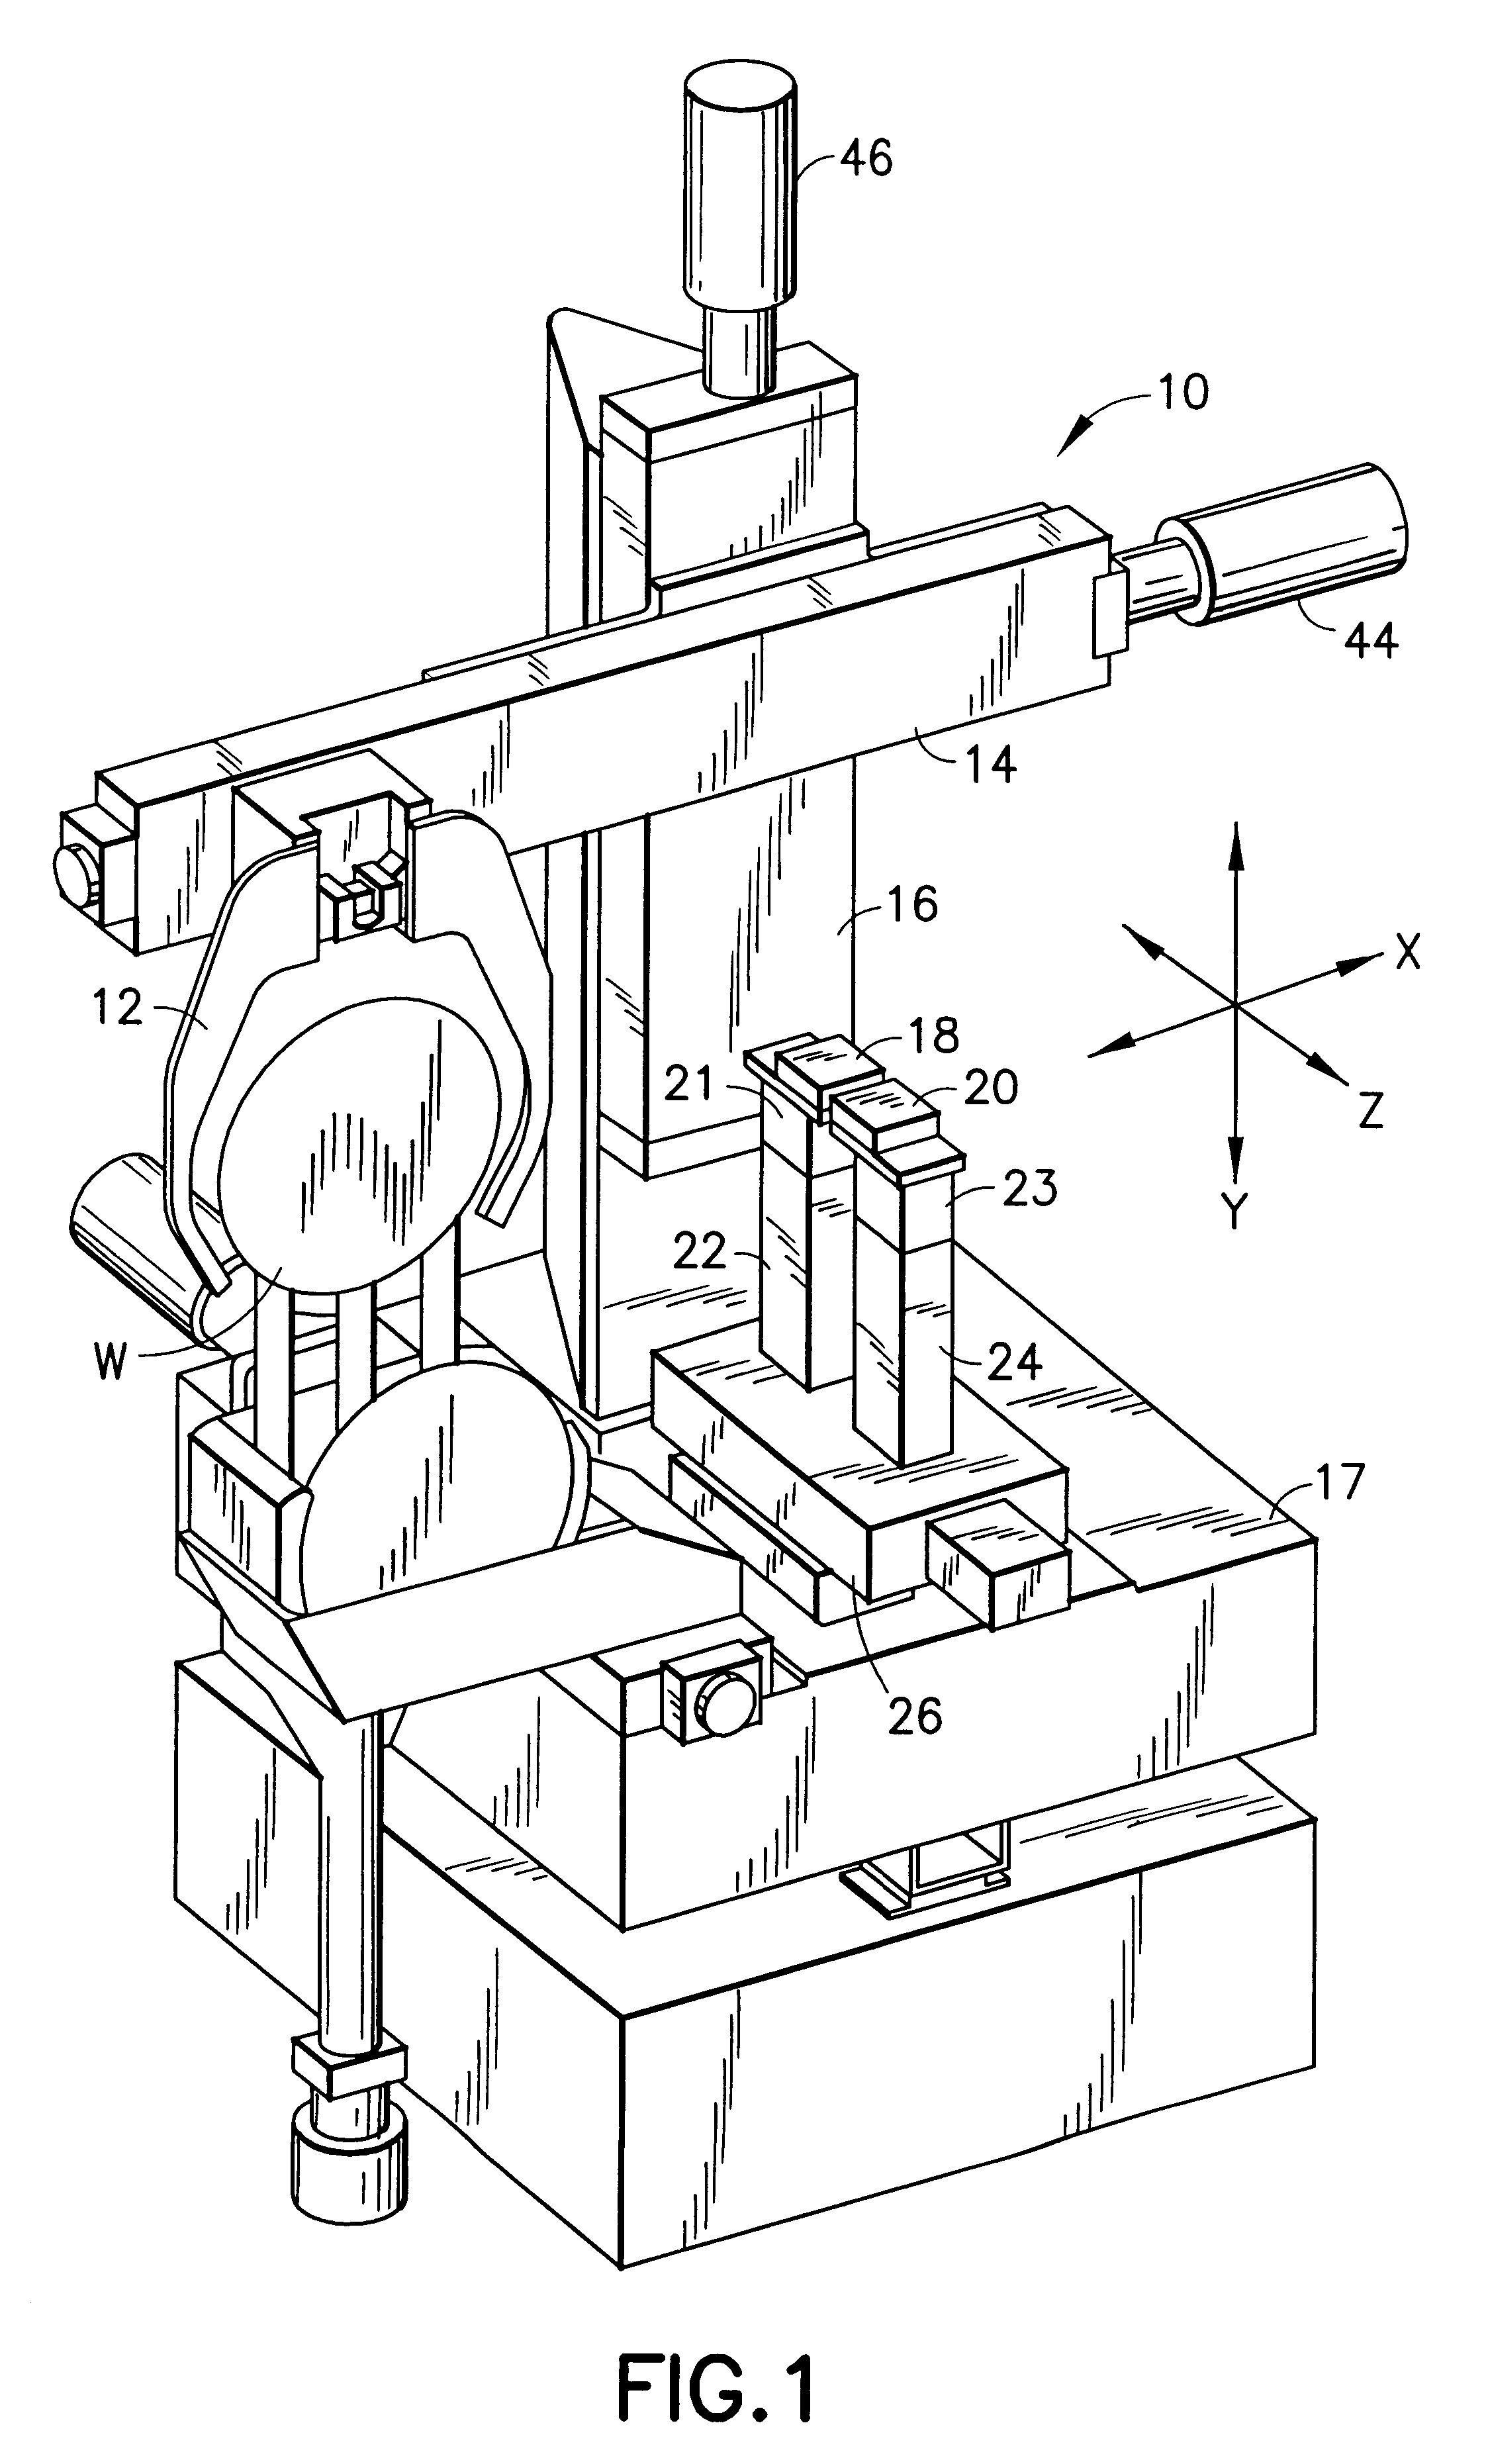 Method and apparatus for moving an article relative to and between a pair of thickness measuring probes to develop a thickness map for the article